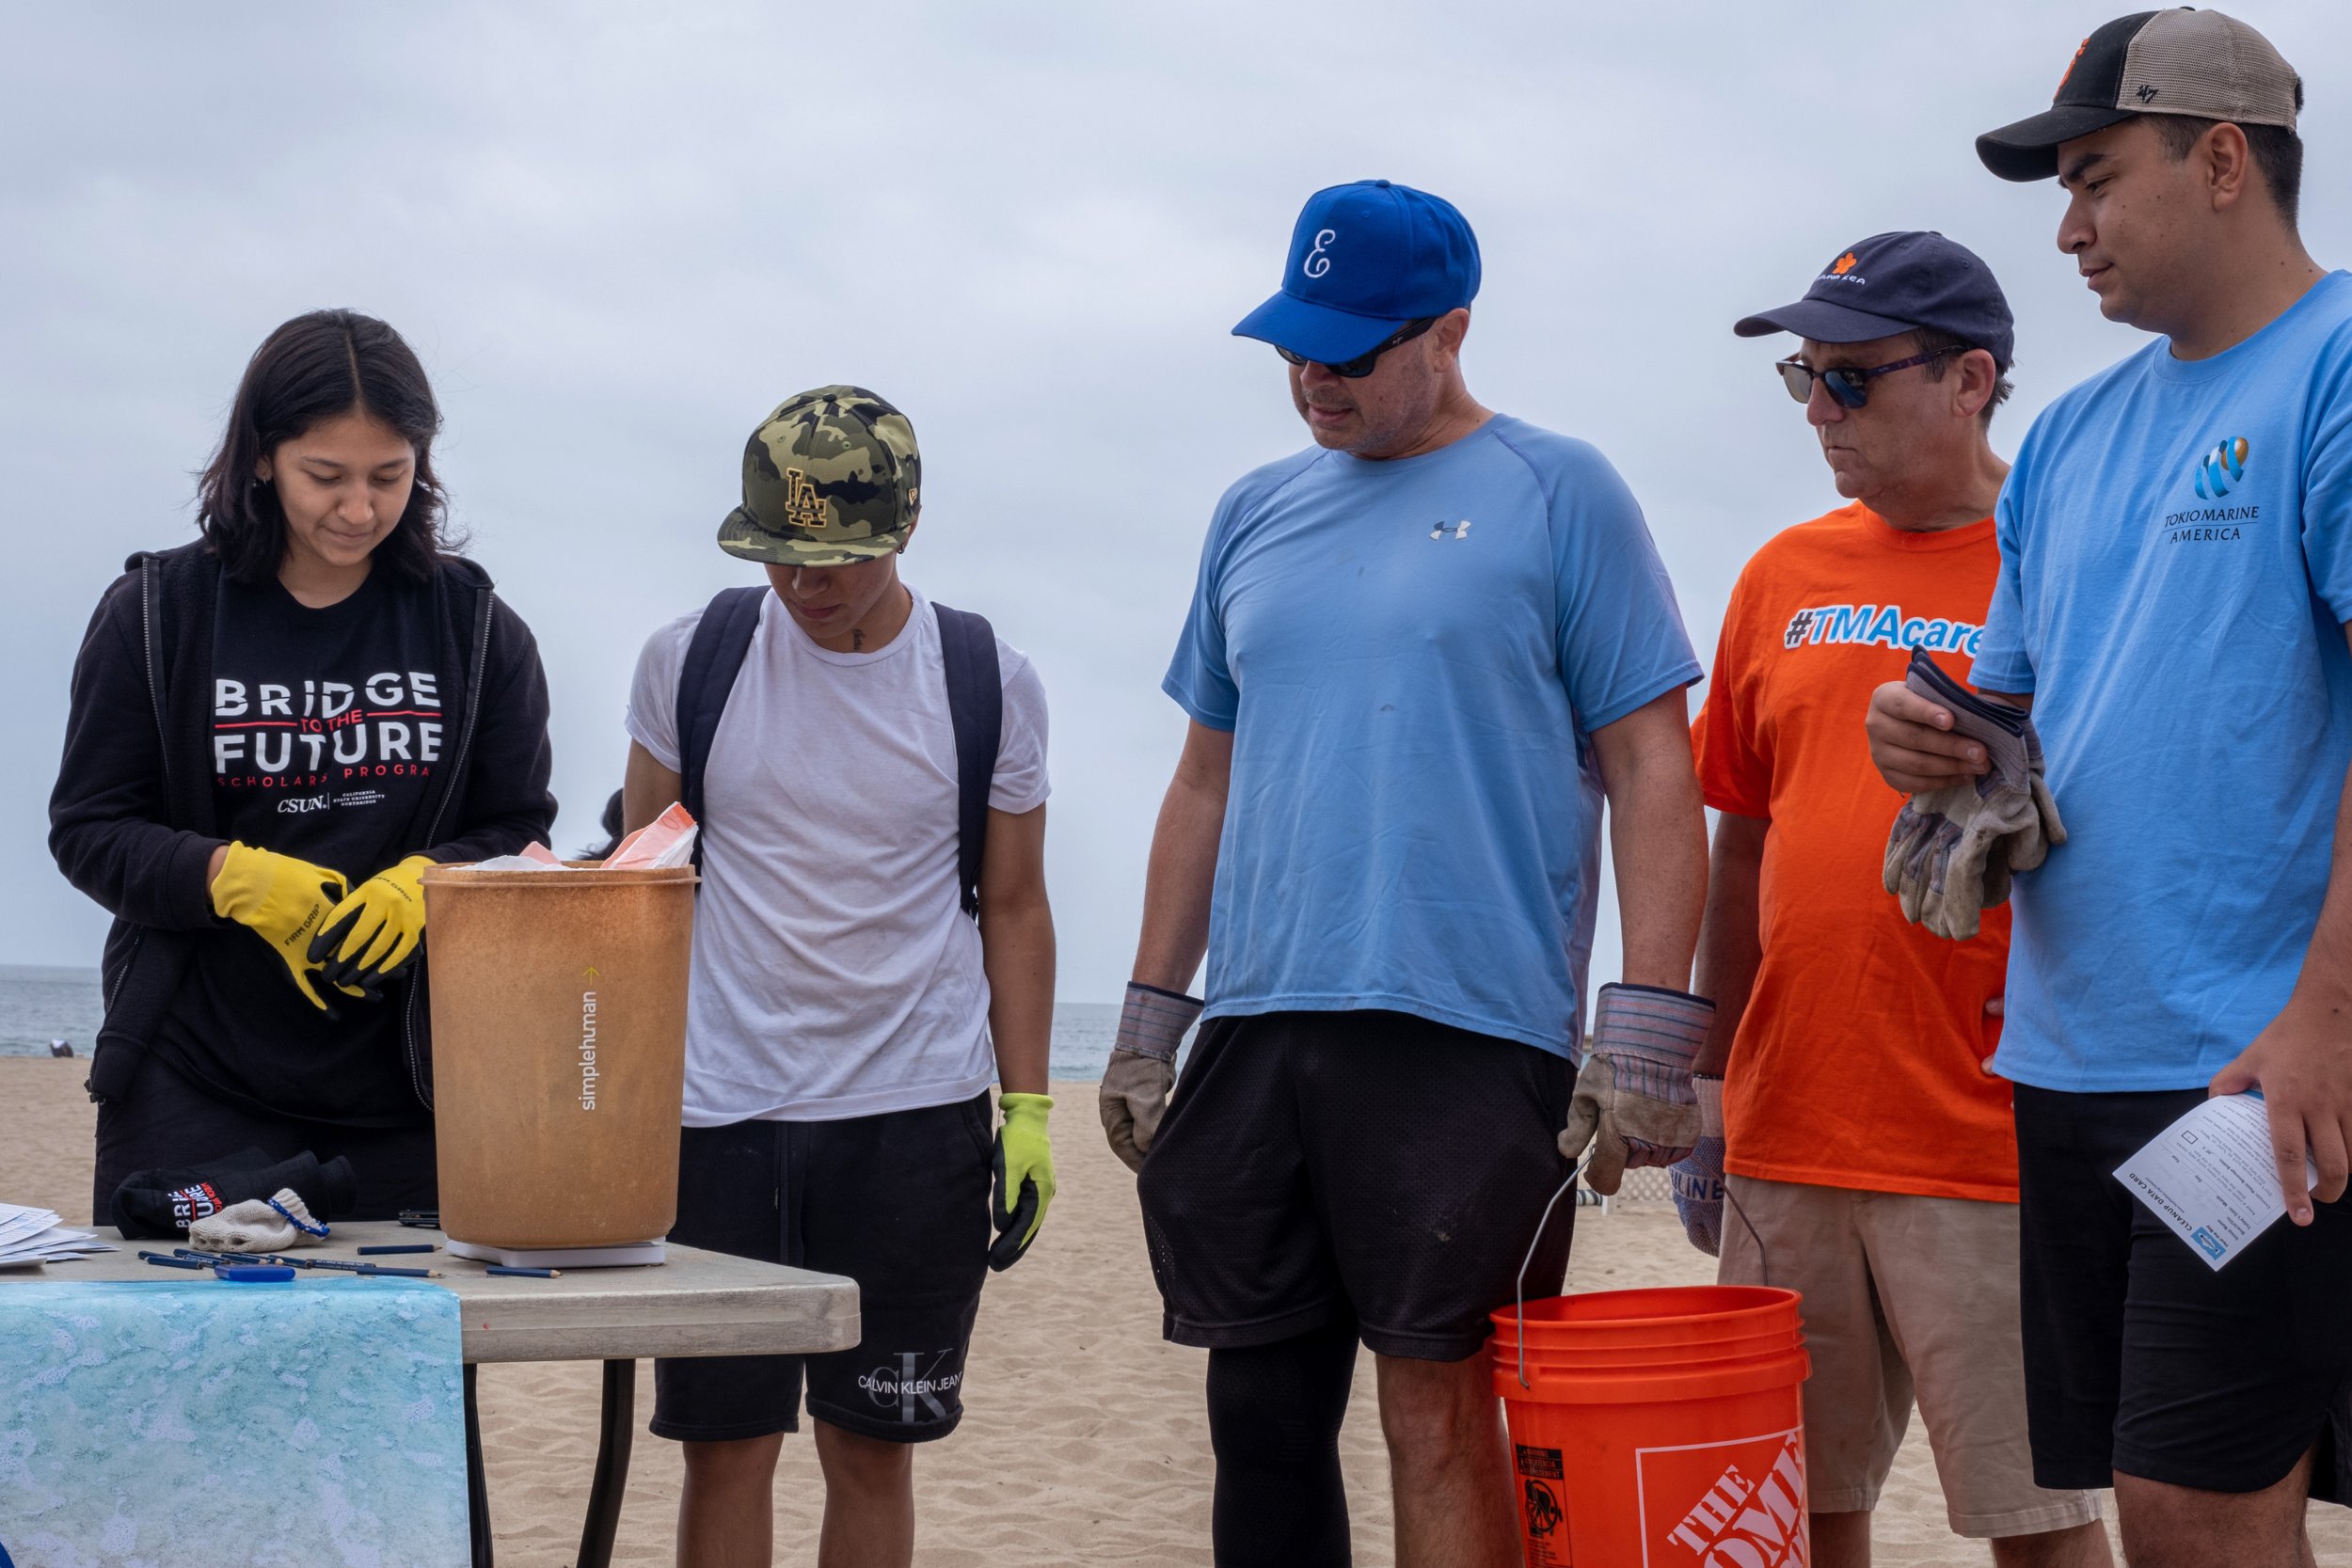  Members of Tokyo Marine LA wait to get the items they picked up from the beach weighed. The volunteer who weighs the items is from the Bridge to the Future Program.  Heal The Bay Coastal Cleanup Day in Santa Monica Calif. on Saturday, September 17, 